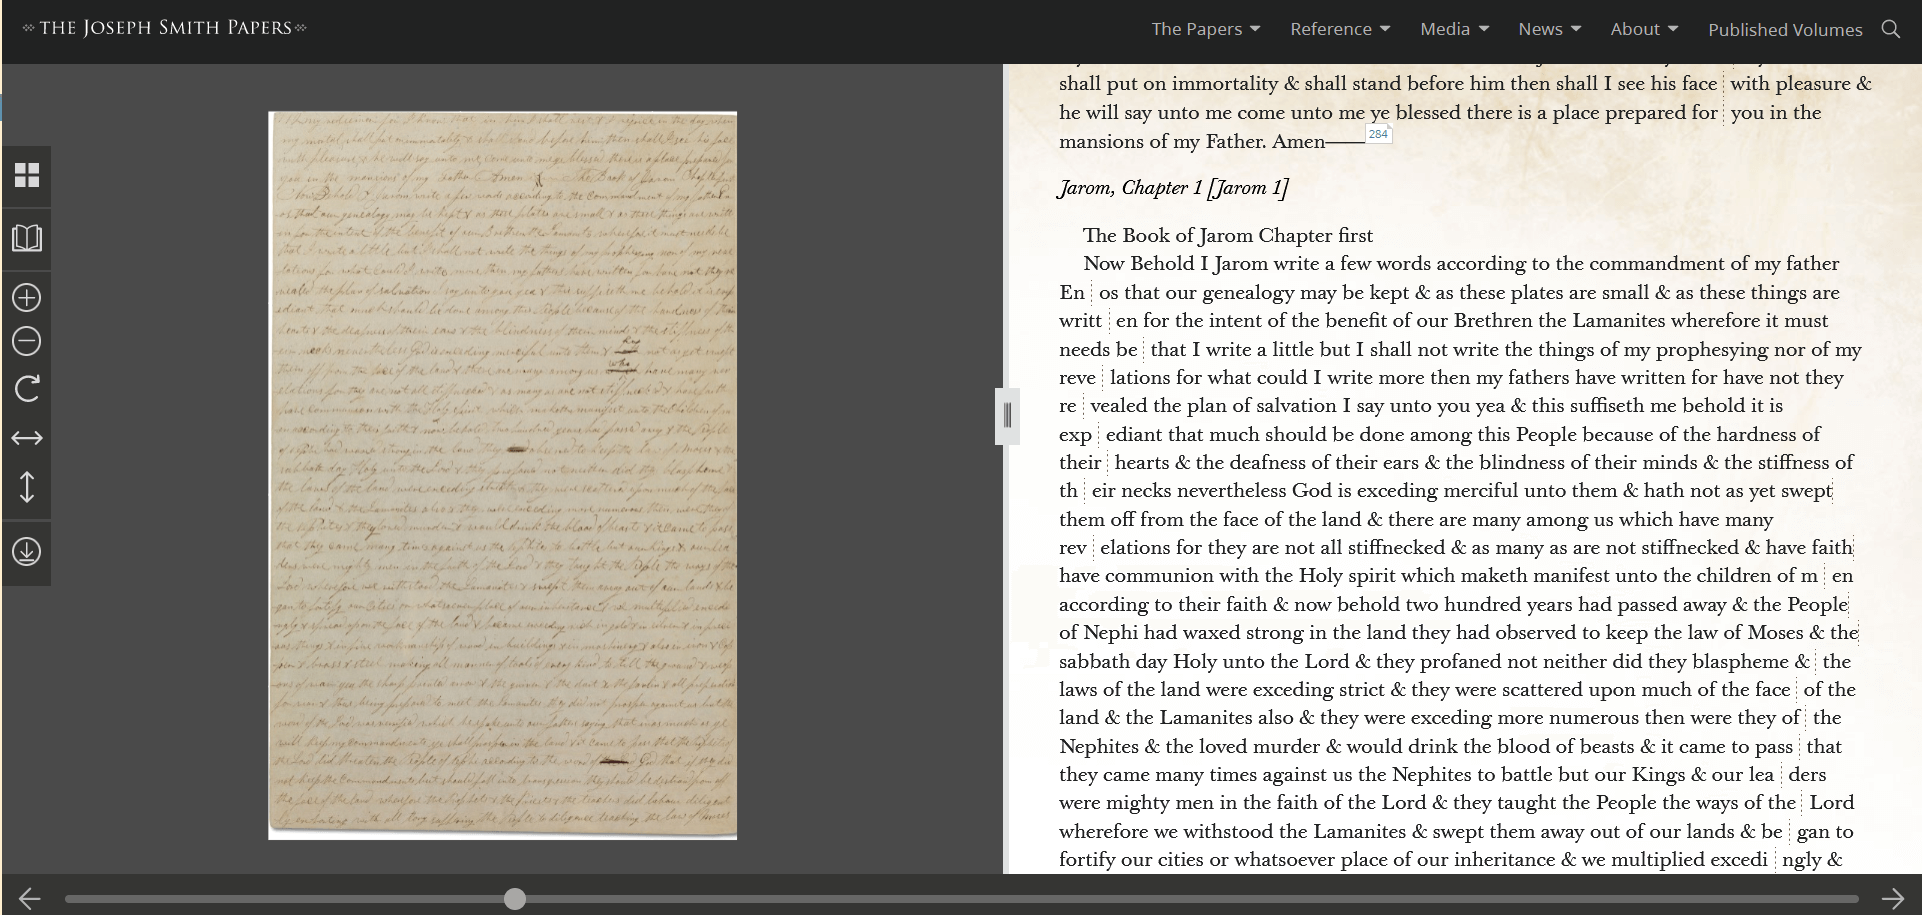 LDS Church's "The Joseph Smith Papers" archive makes scans of the valuable manuscript available to the public, with digital translations on the side